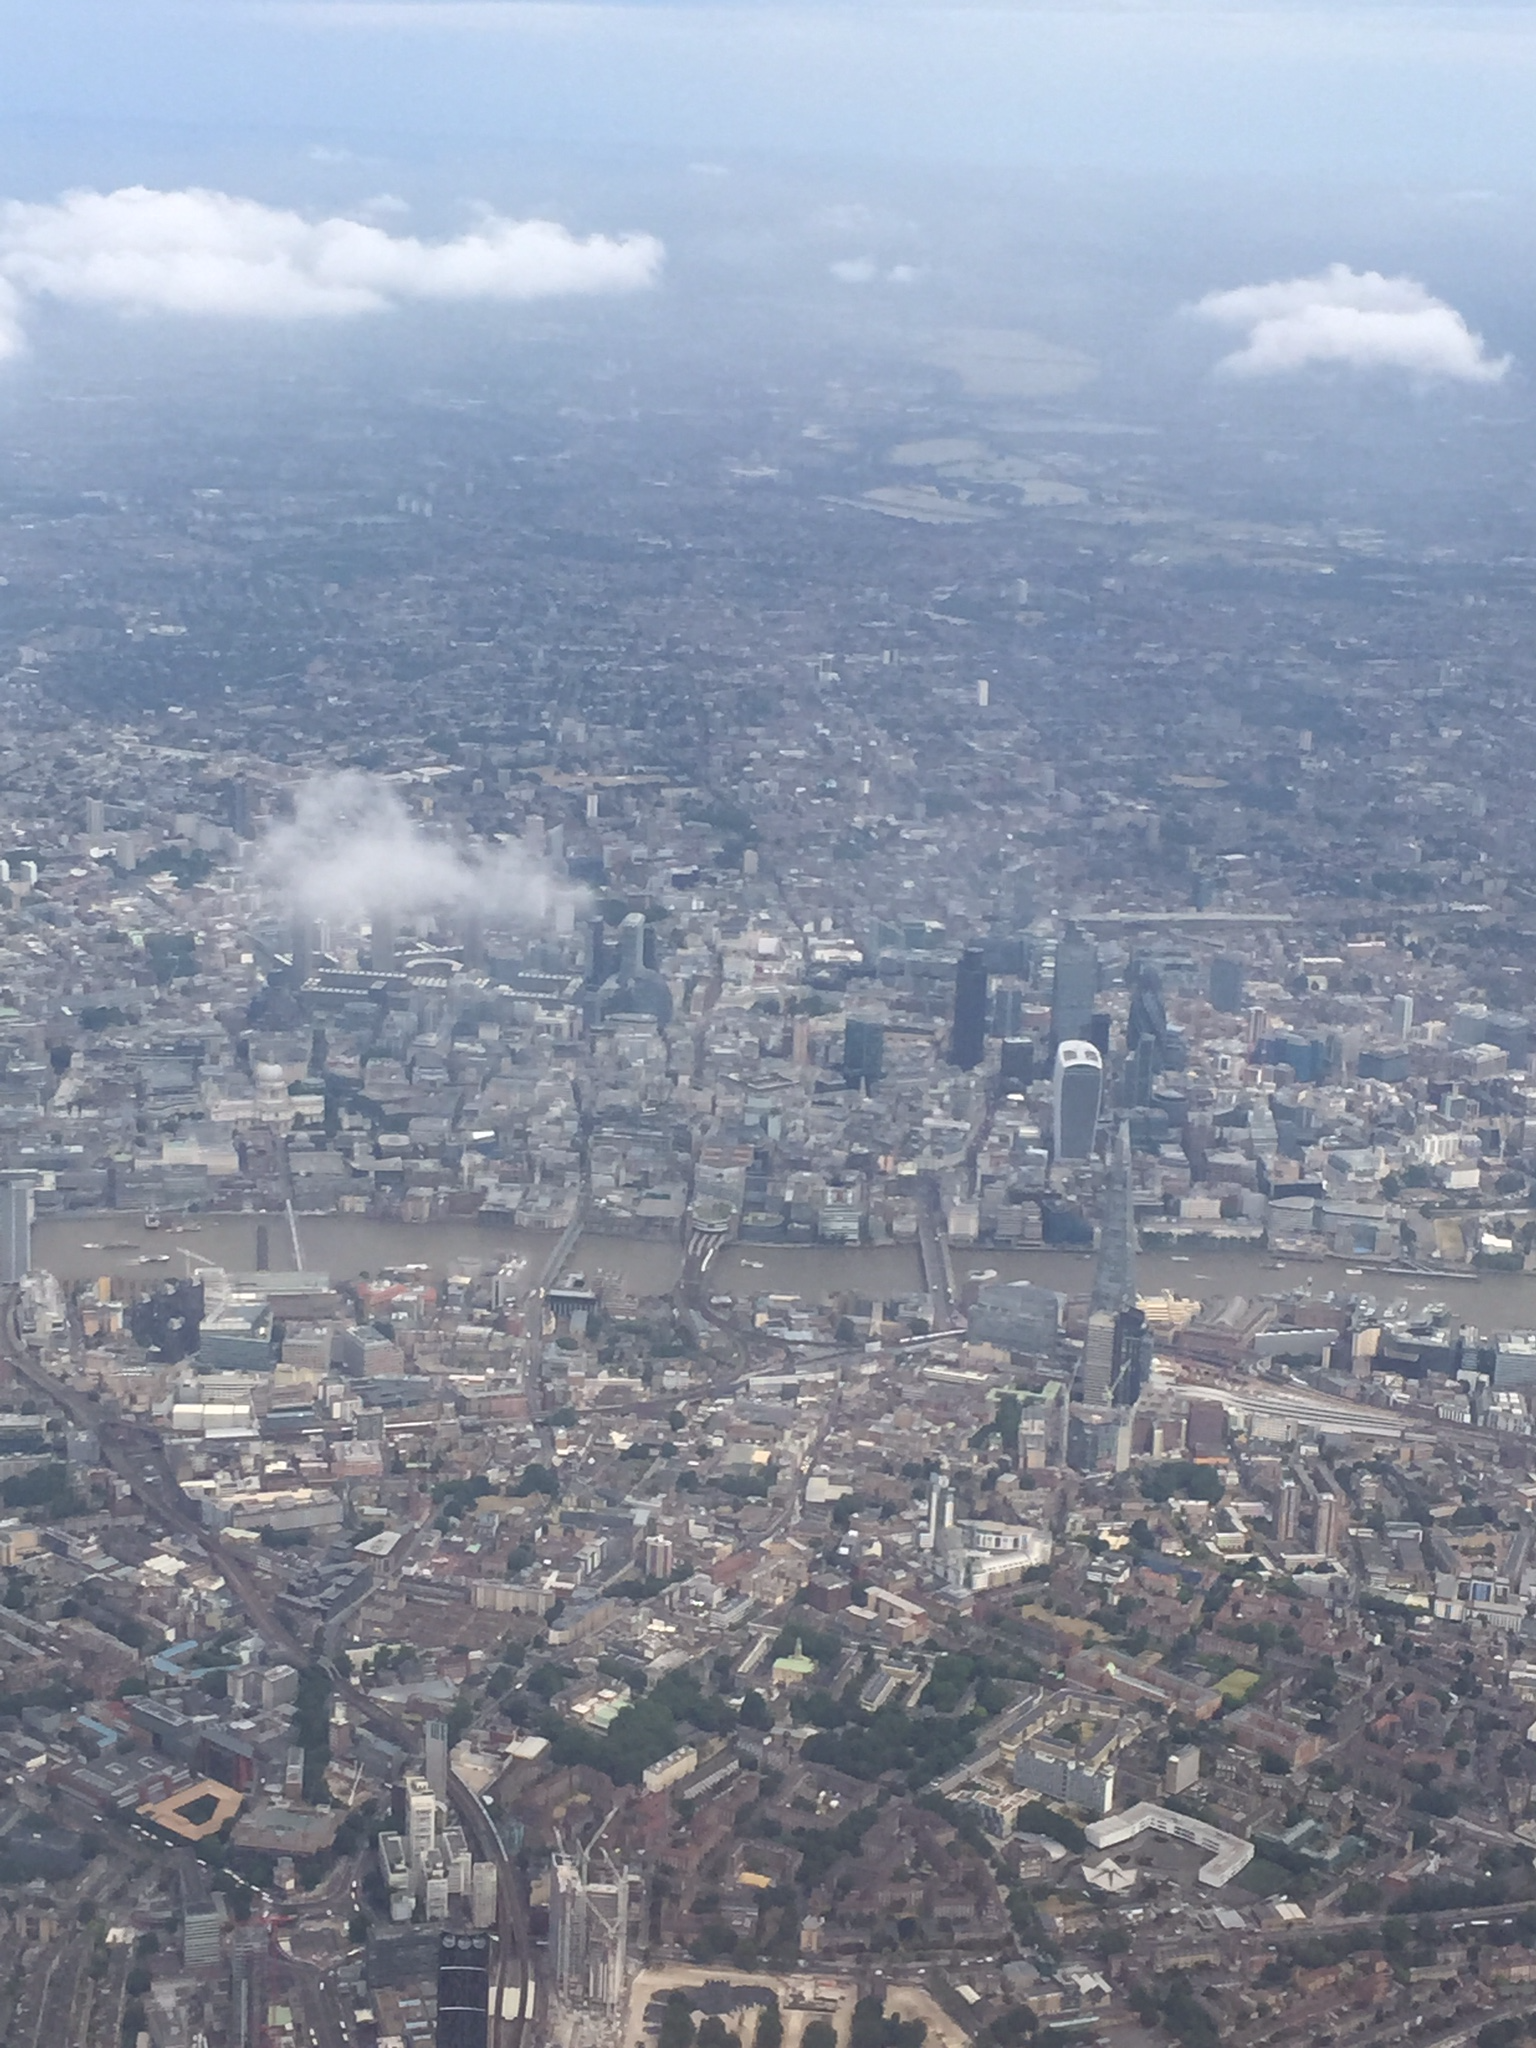 Smashing view of London from landing approach